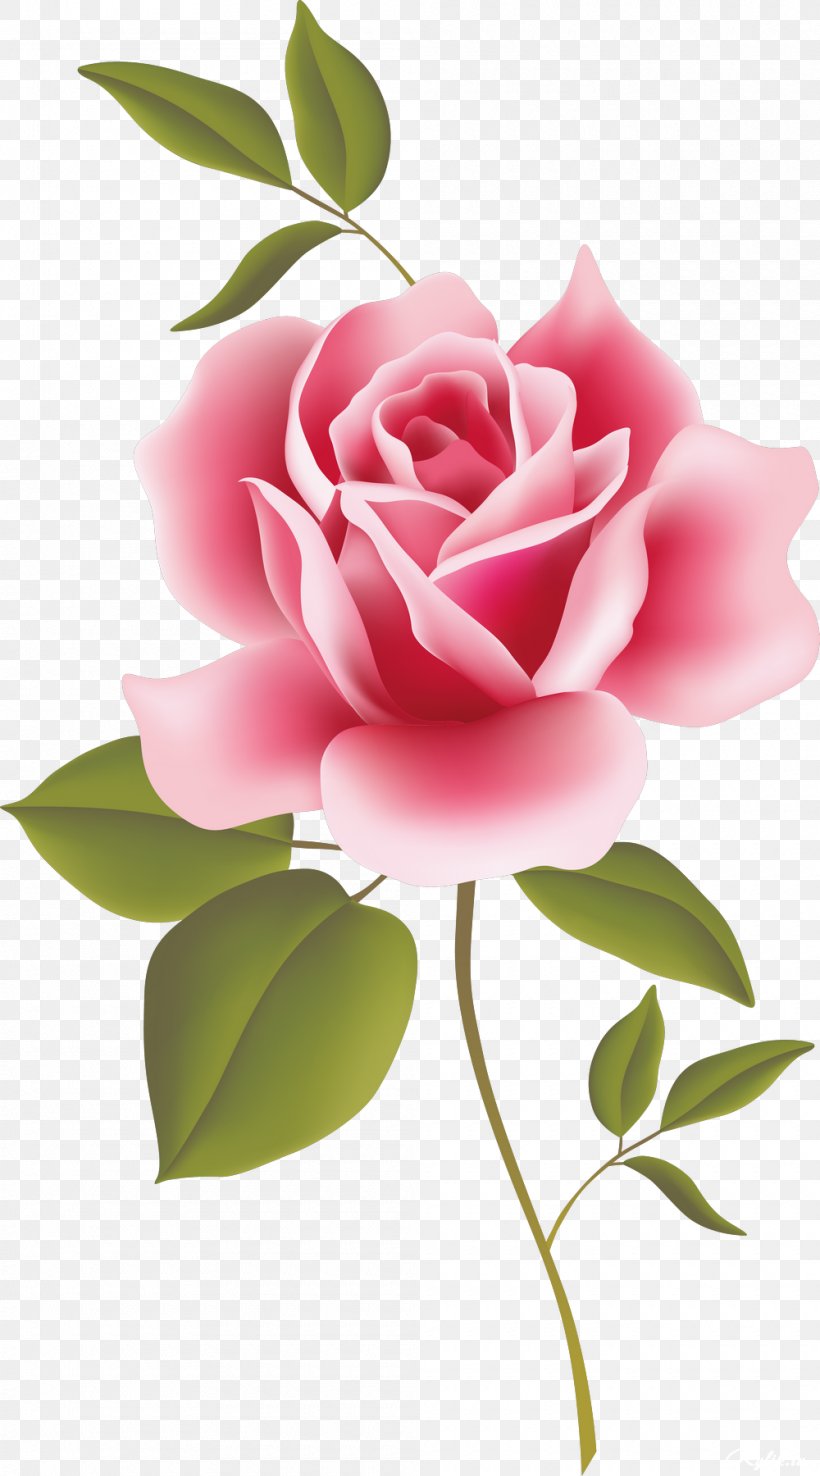 Illustration Vector Realistic Of Beautiful Rose Flowers Background With  Love Text Graphic Design Concept Of Flower Wallpaper Spring Season Concept  Stock Illustration  Download Image Now  iStock